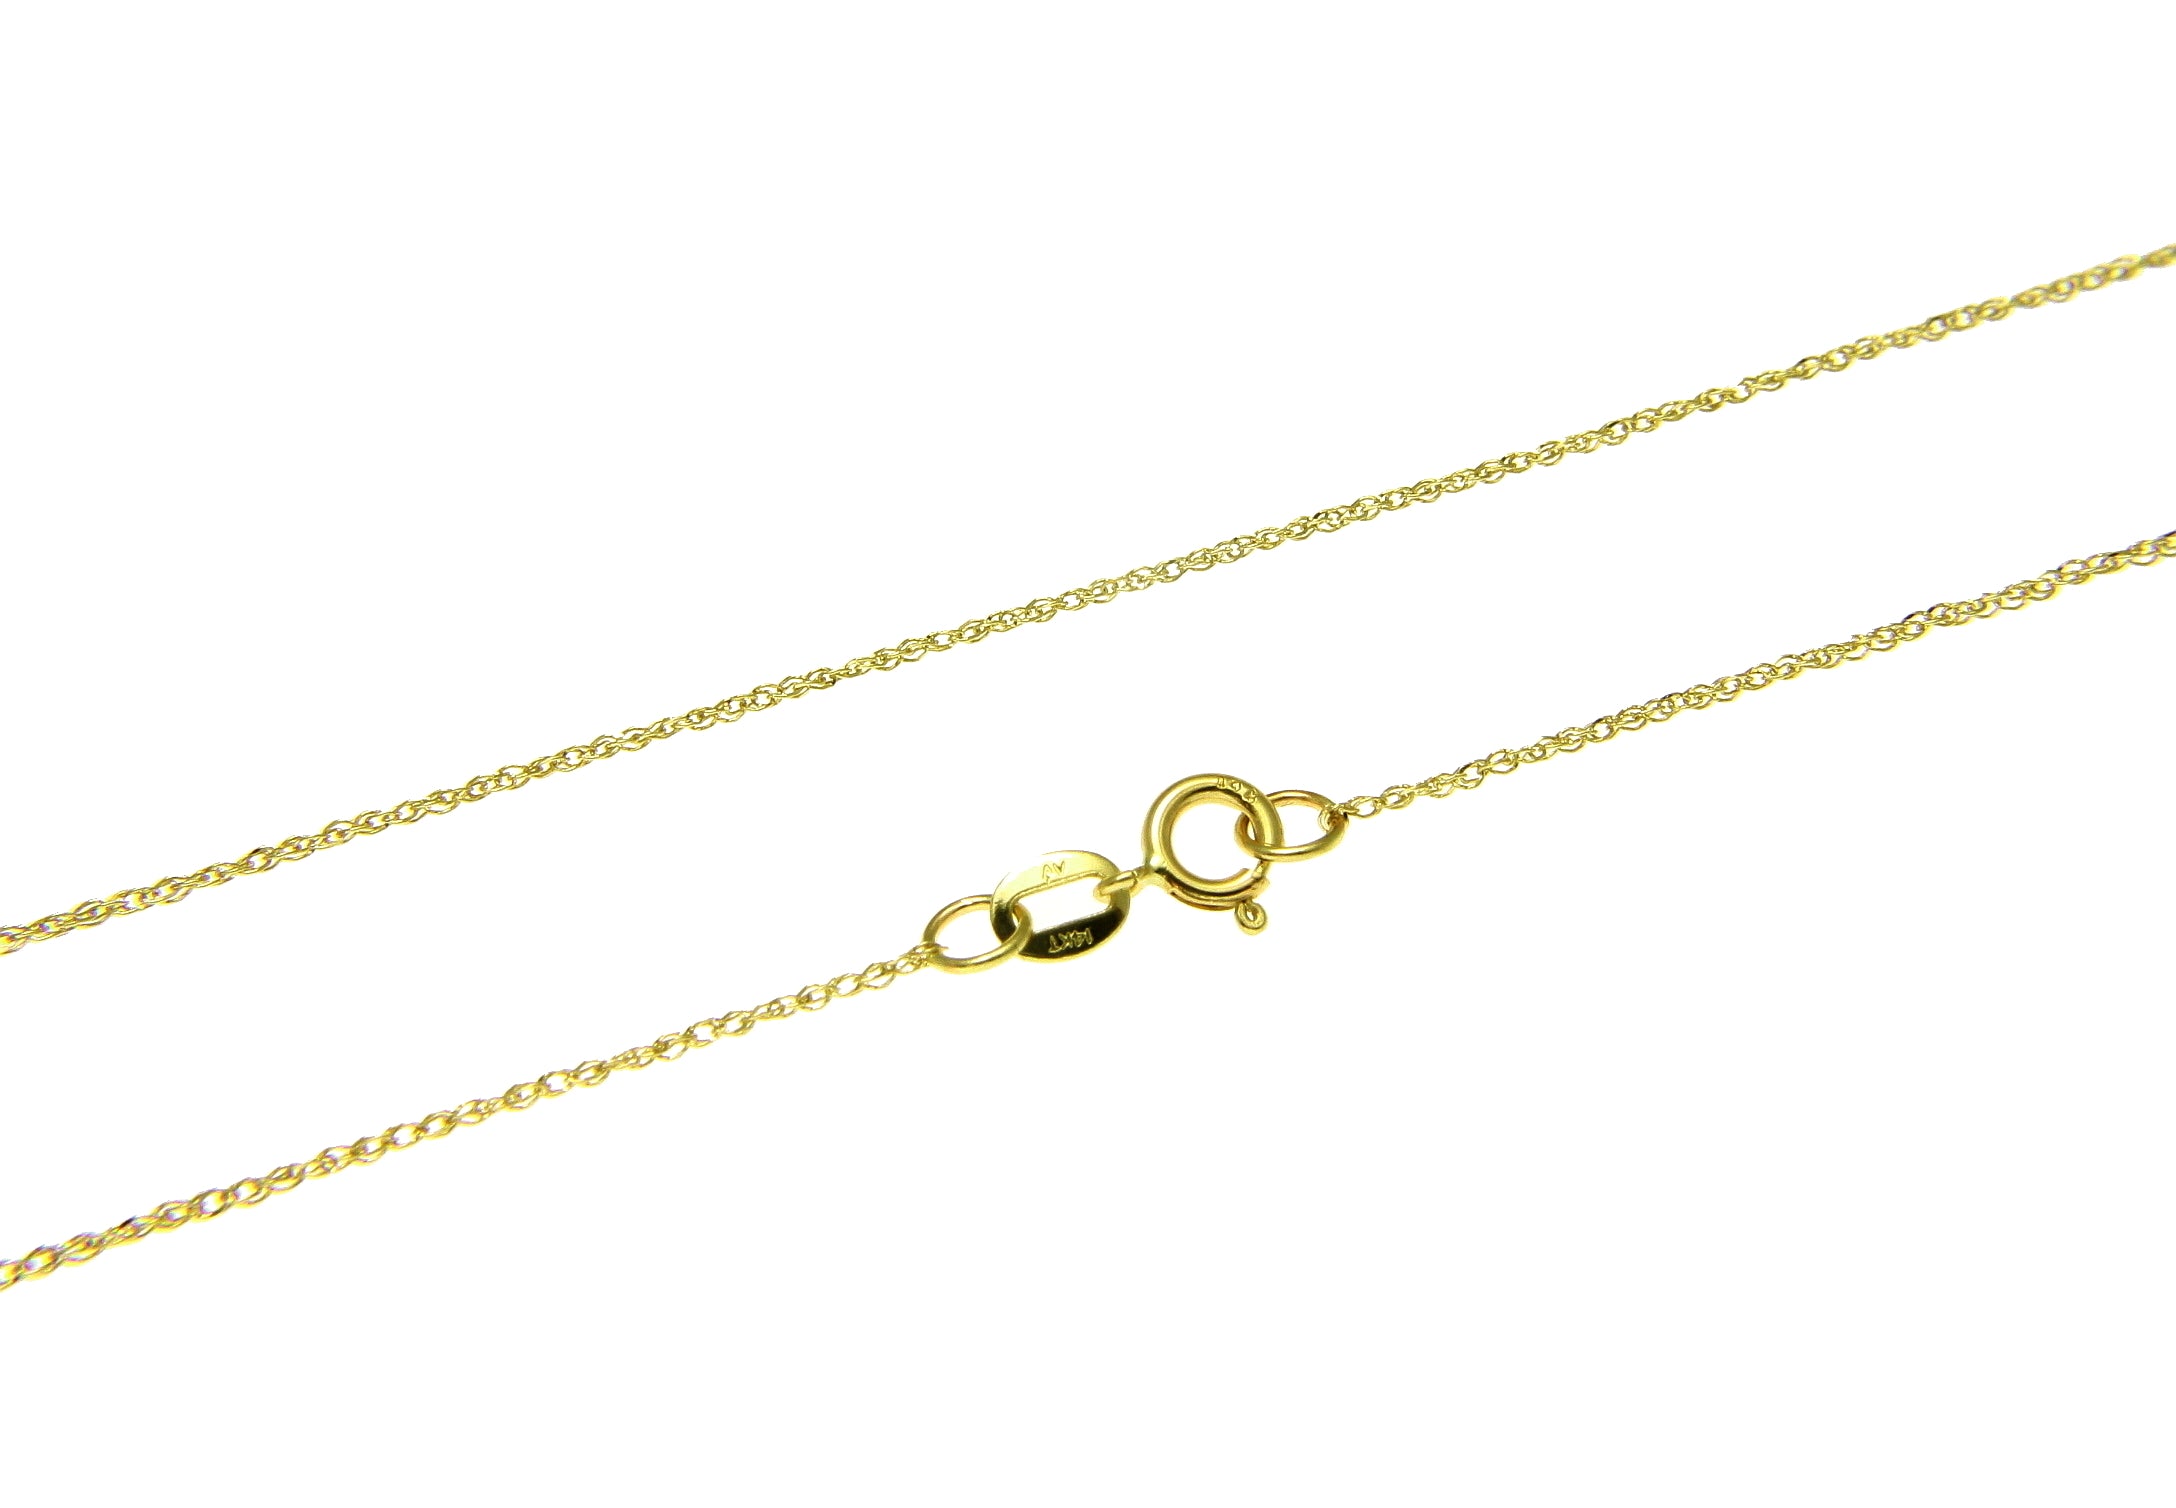 14K Solid Yellow Gold Rope Necklace 14K Real Gold Rope Chain Ladies Gold  Chain 14K Man Gold Chain 16 18 20 22 24 Inch 1.5mm 